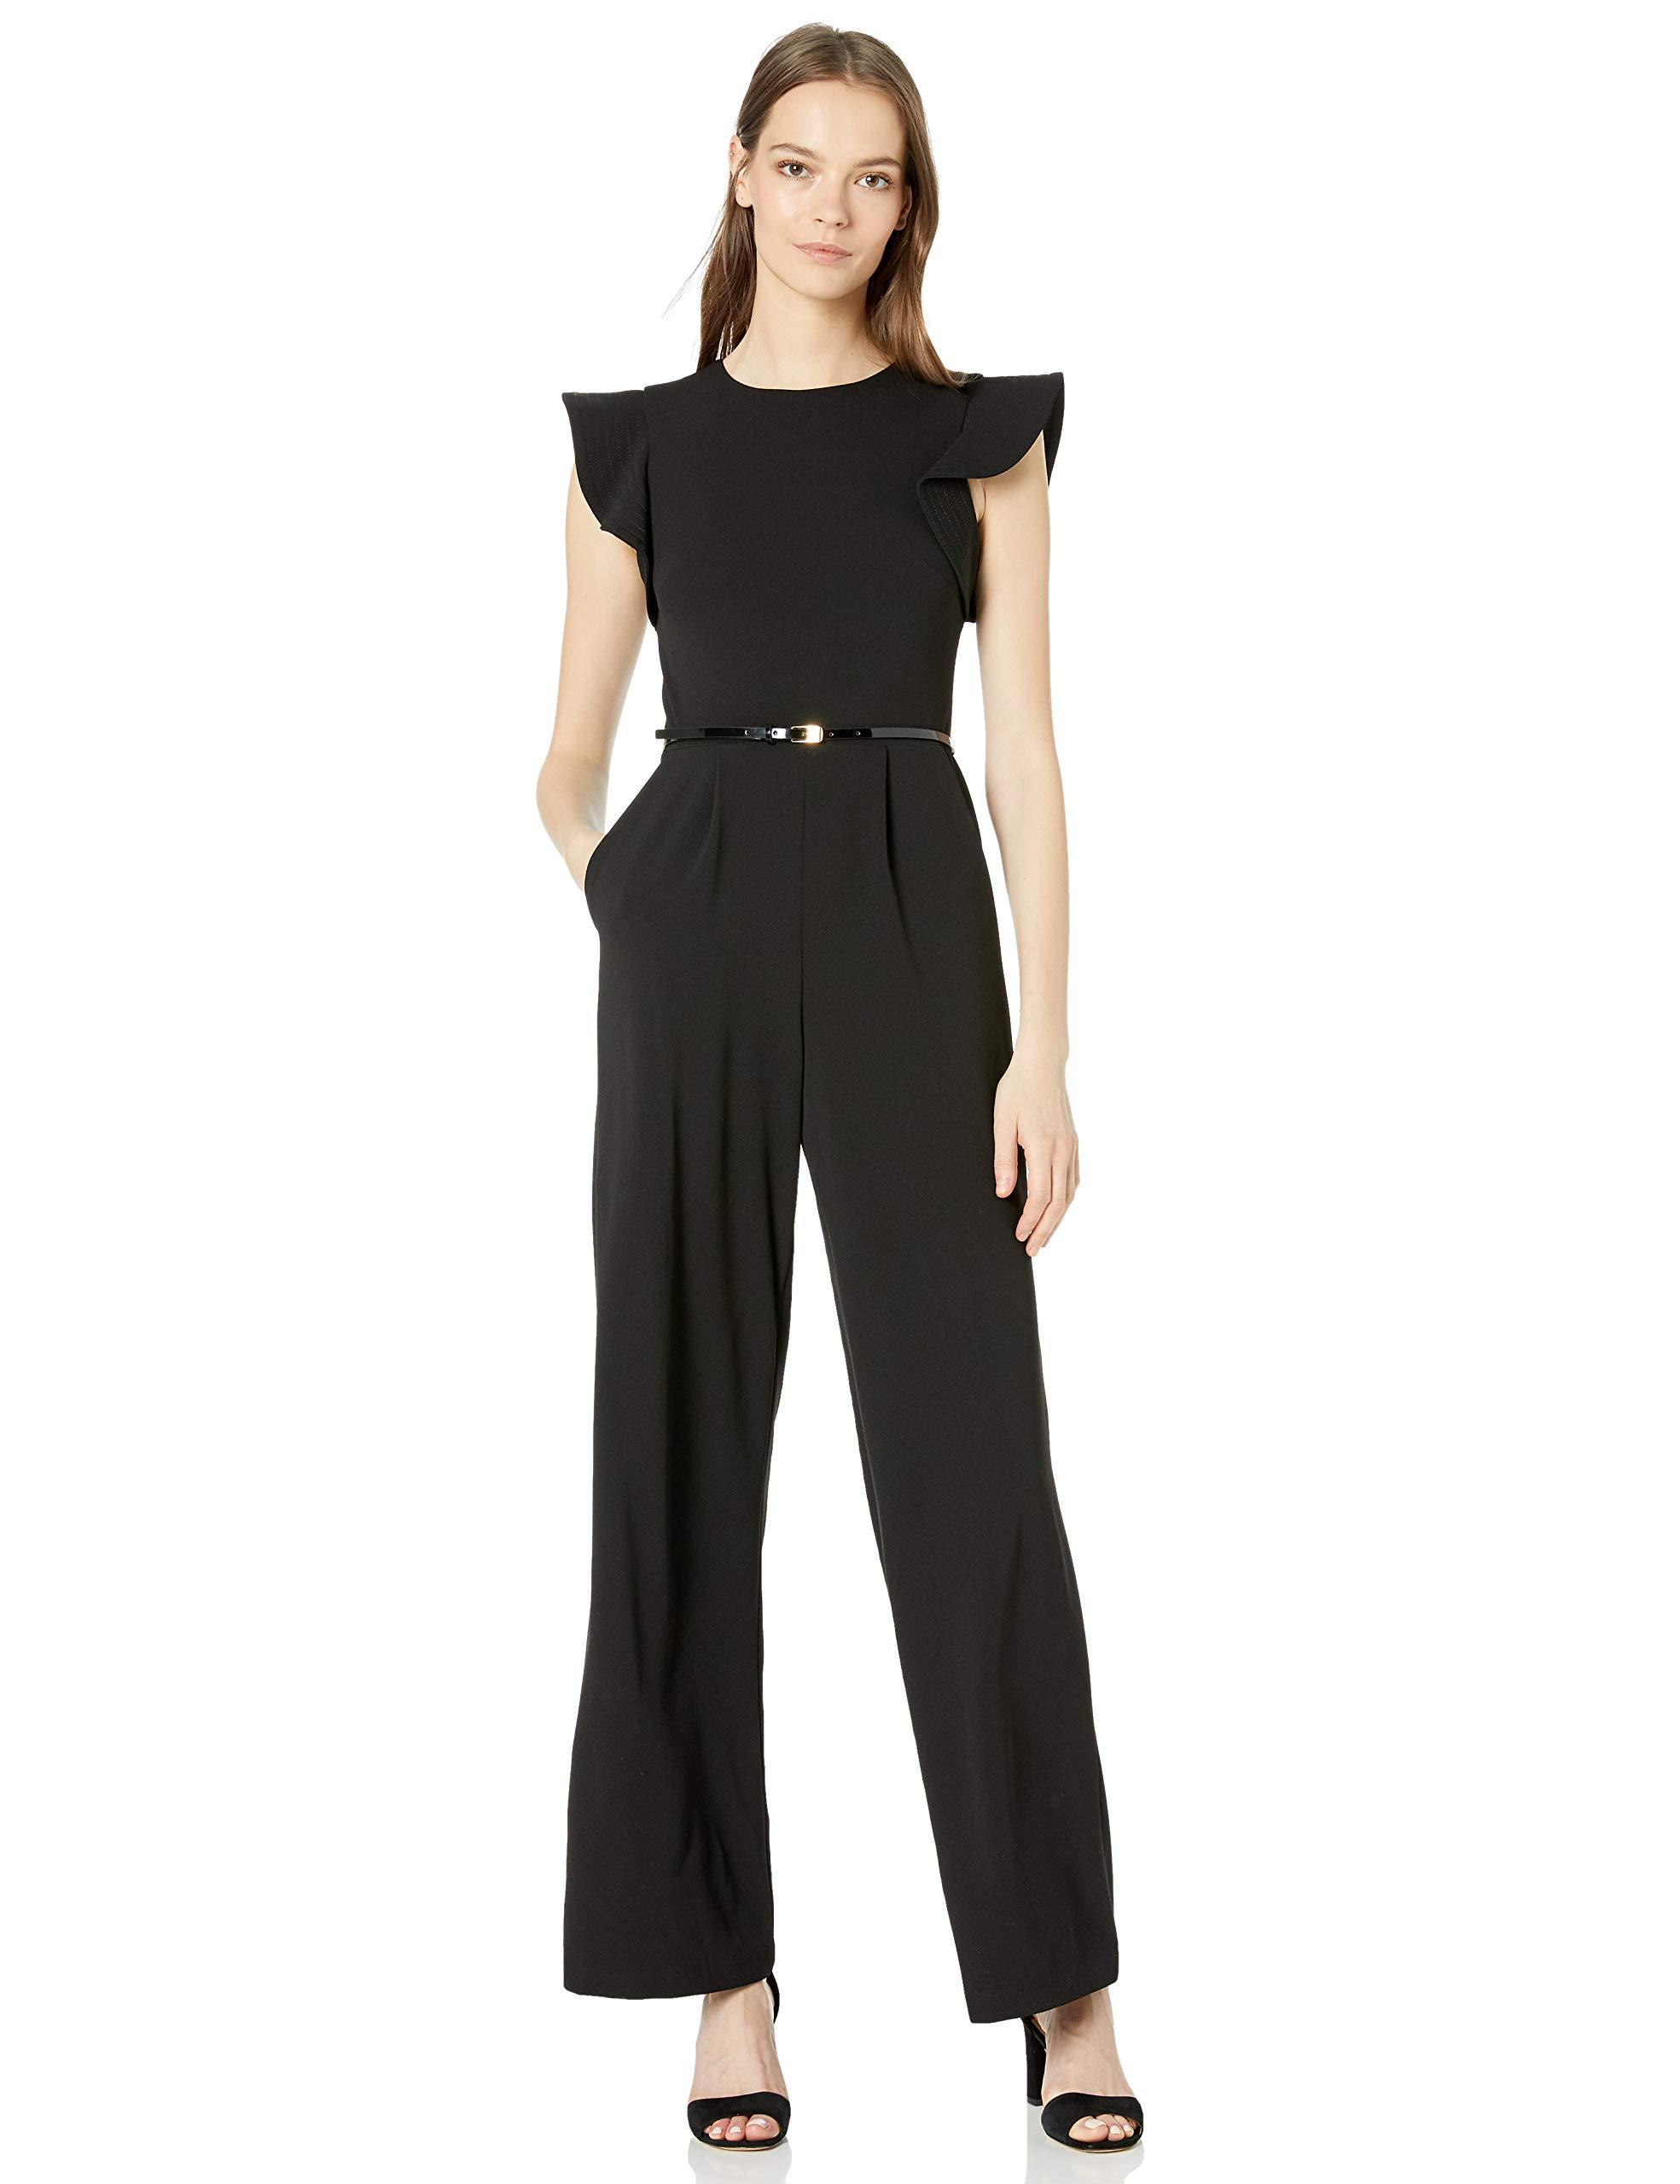 Calvin Klein Sleeveless Belted Jumpsuit With Ruffle Armhole in Black - Lyst